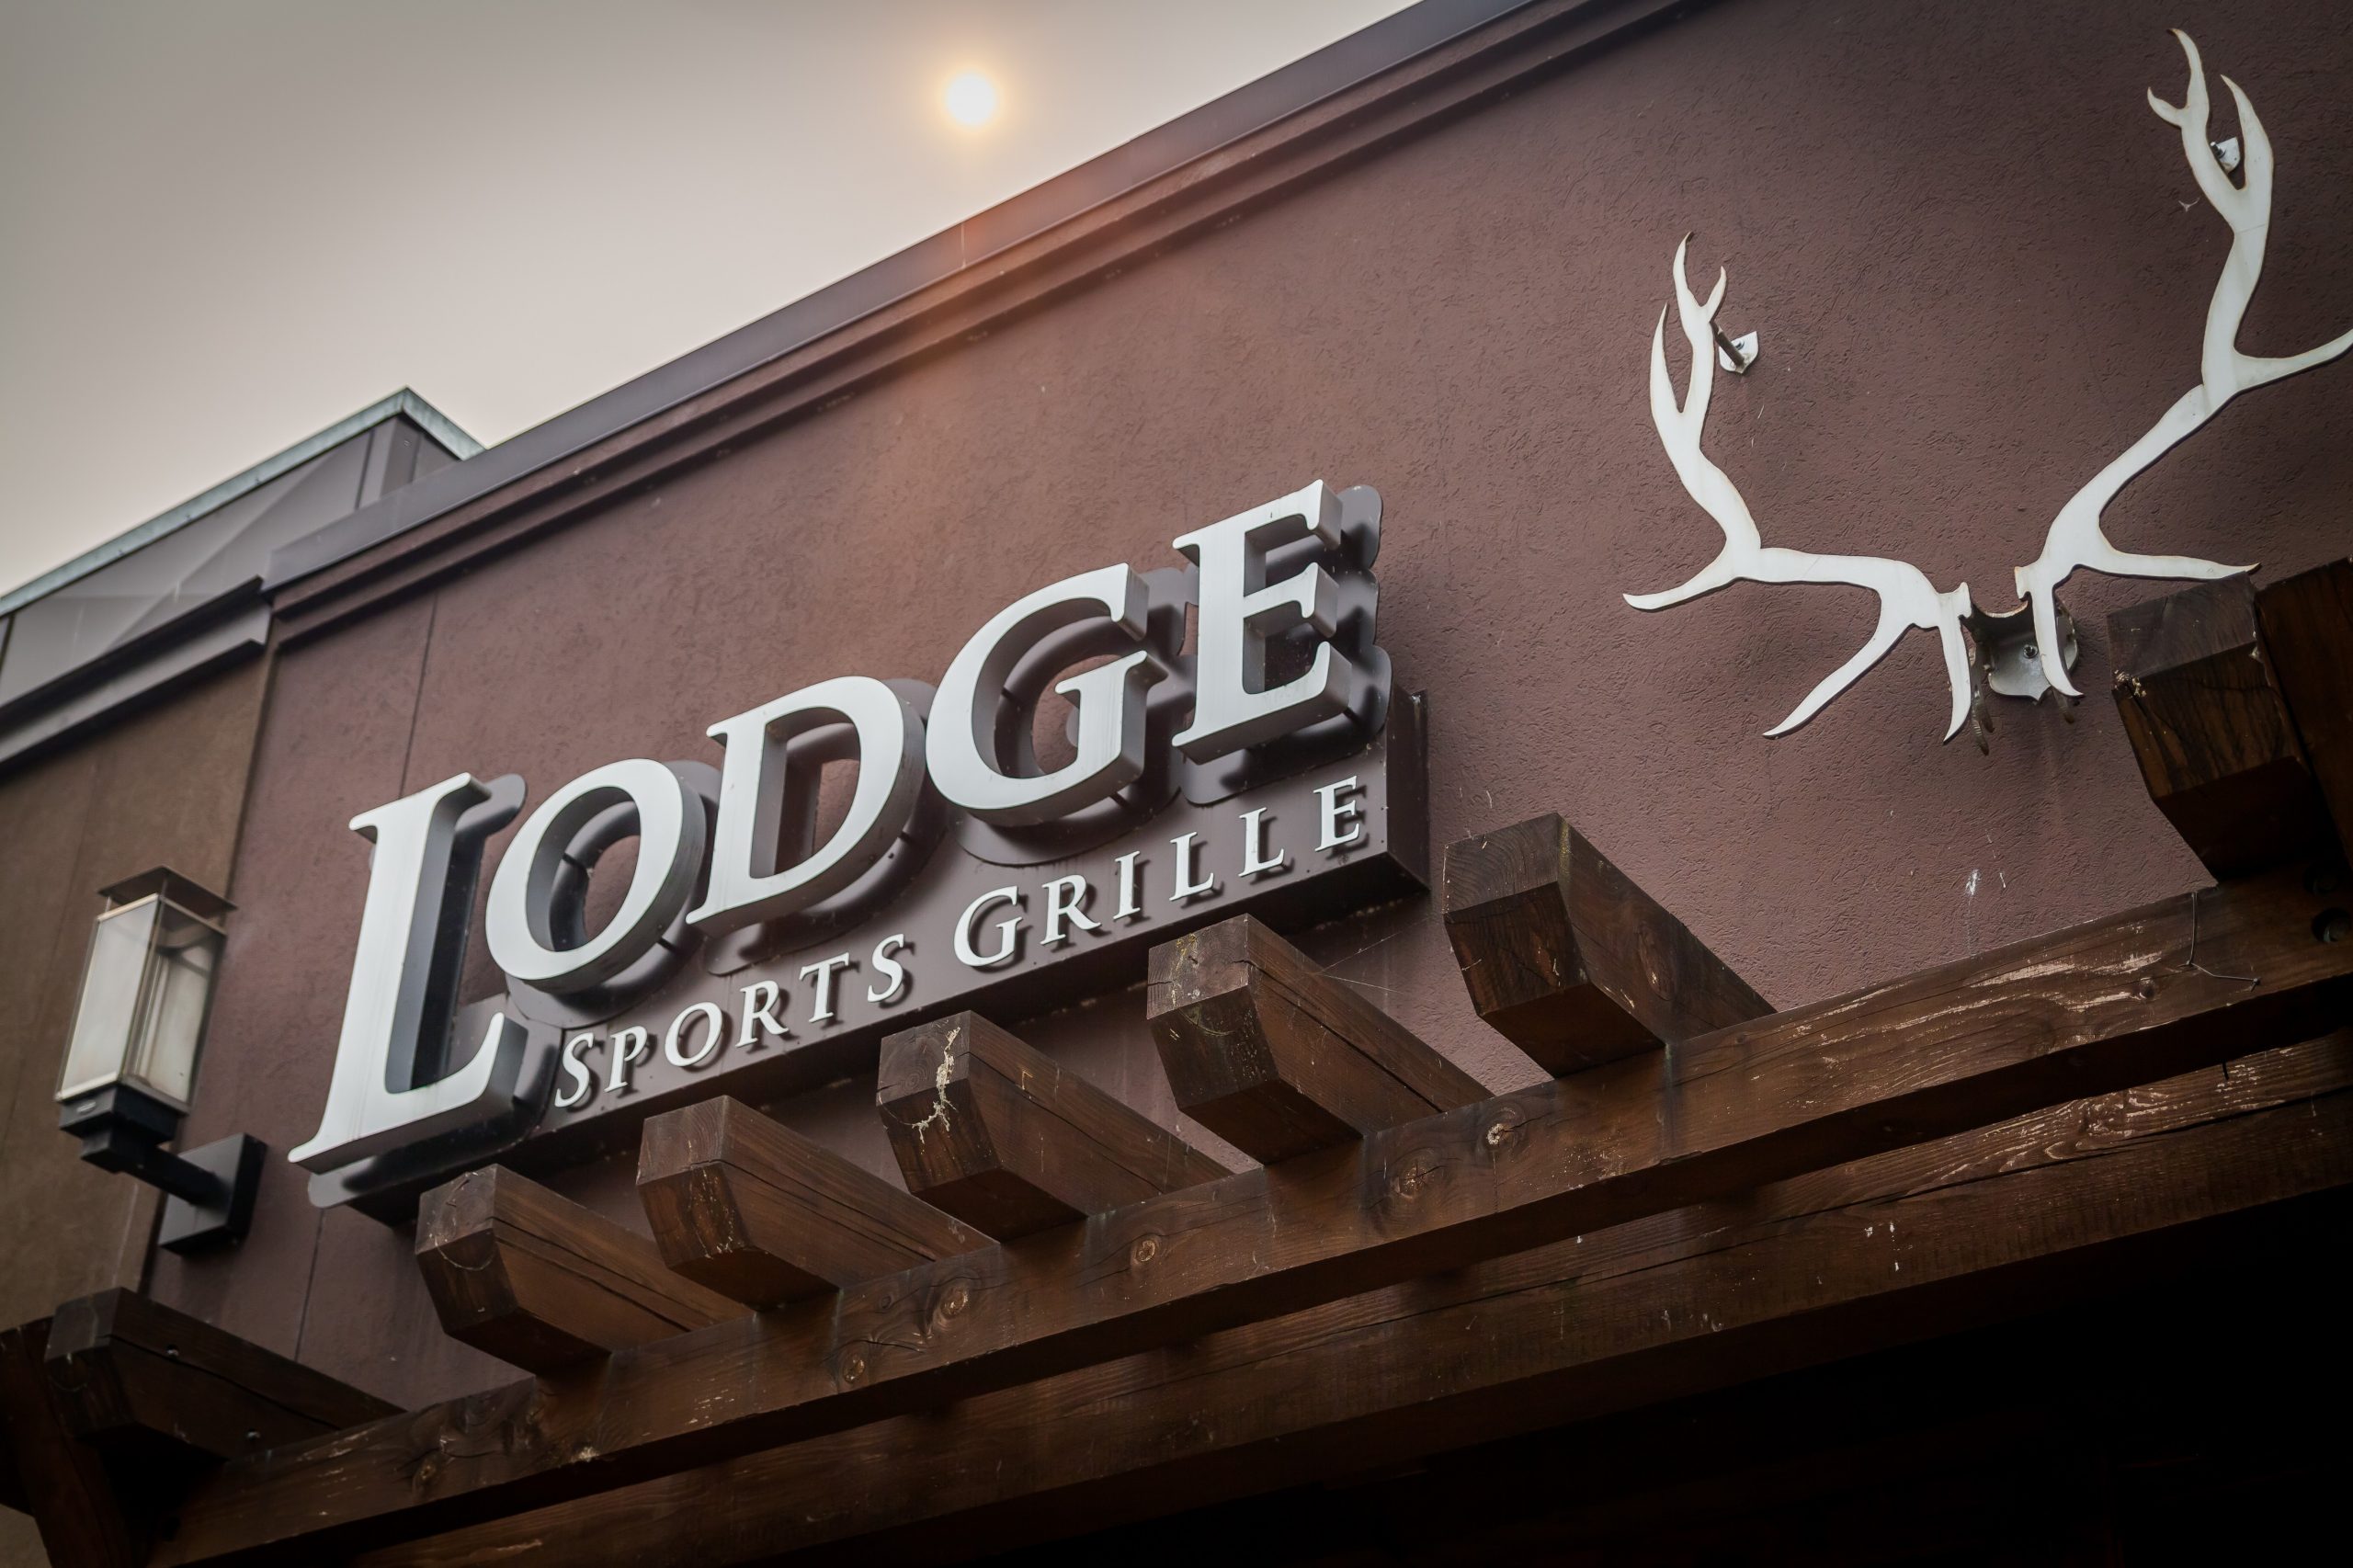 Lodge Sports Grille